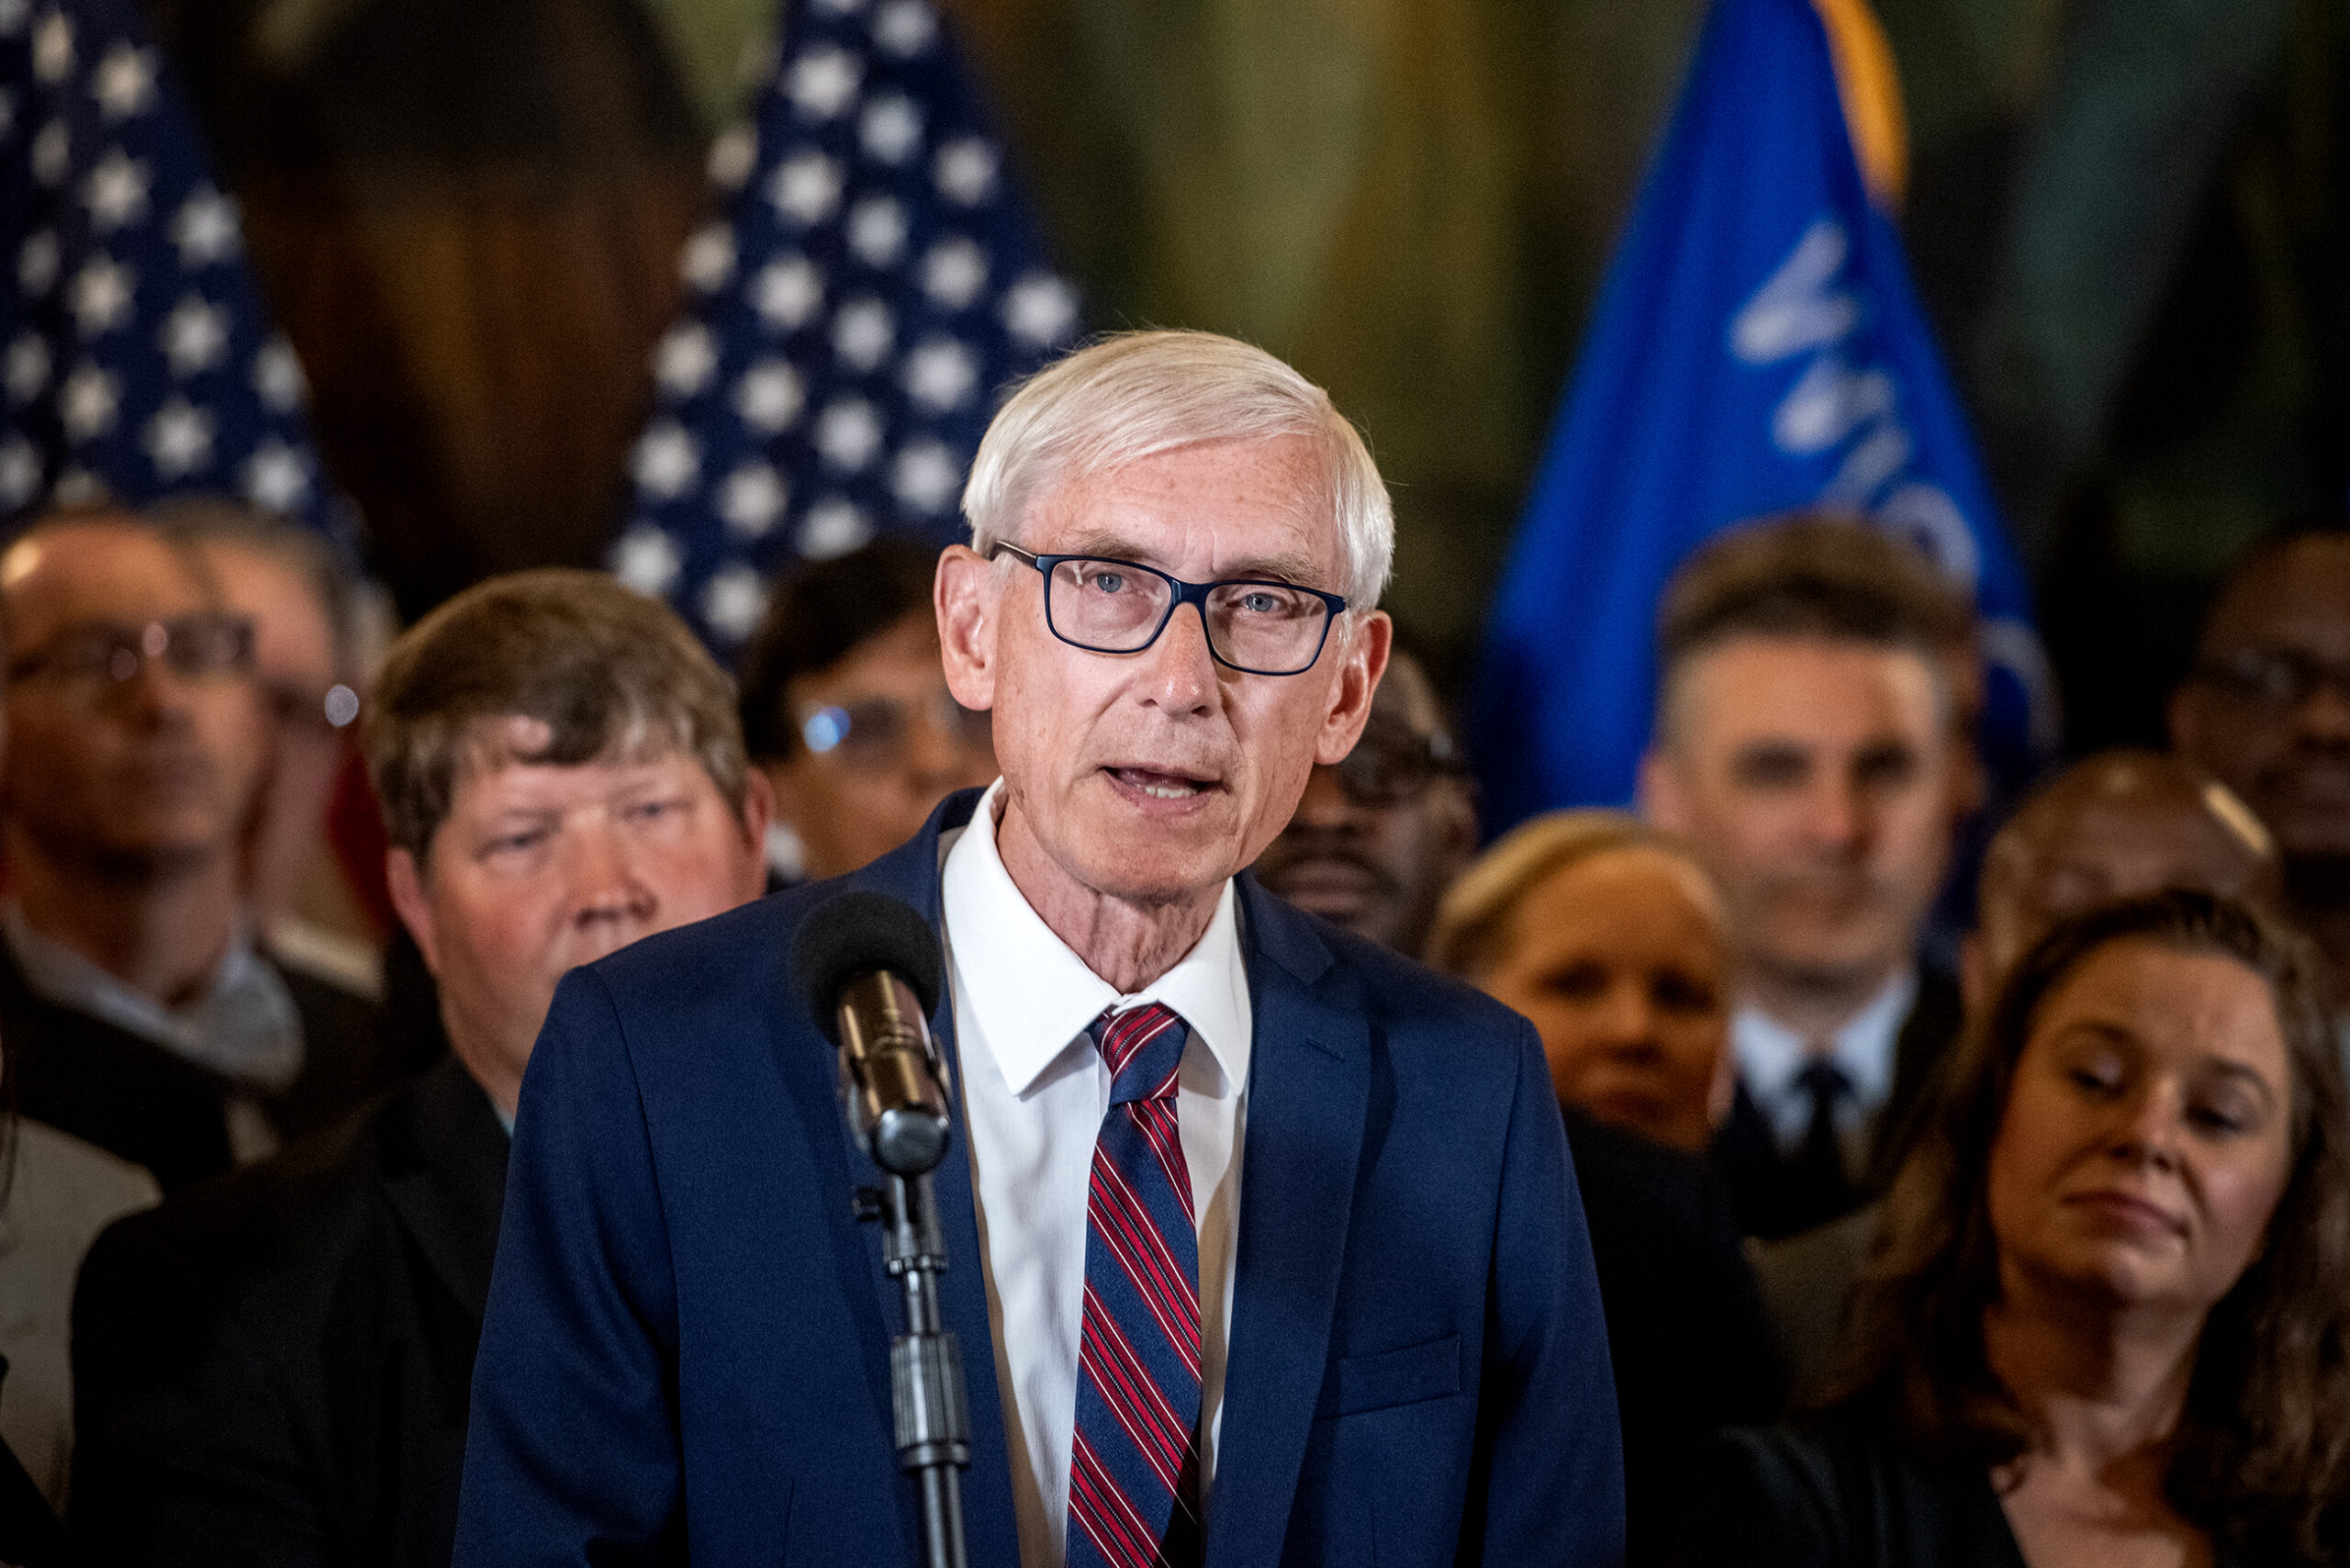 Evers says compromise still possible on big issues like medical marijuana, child care